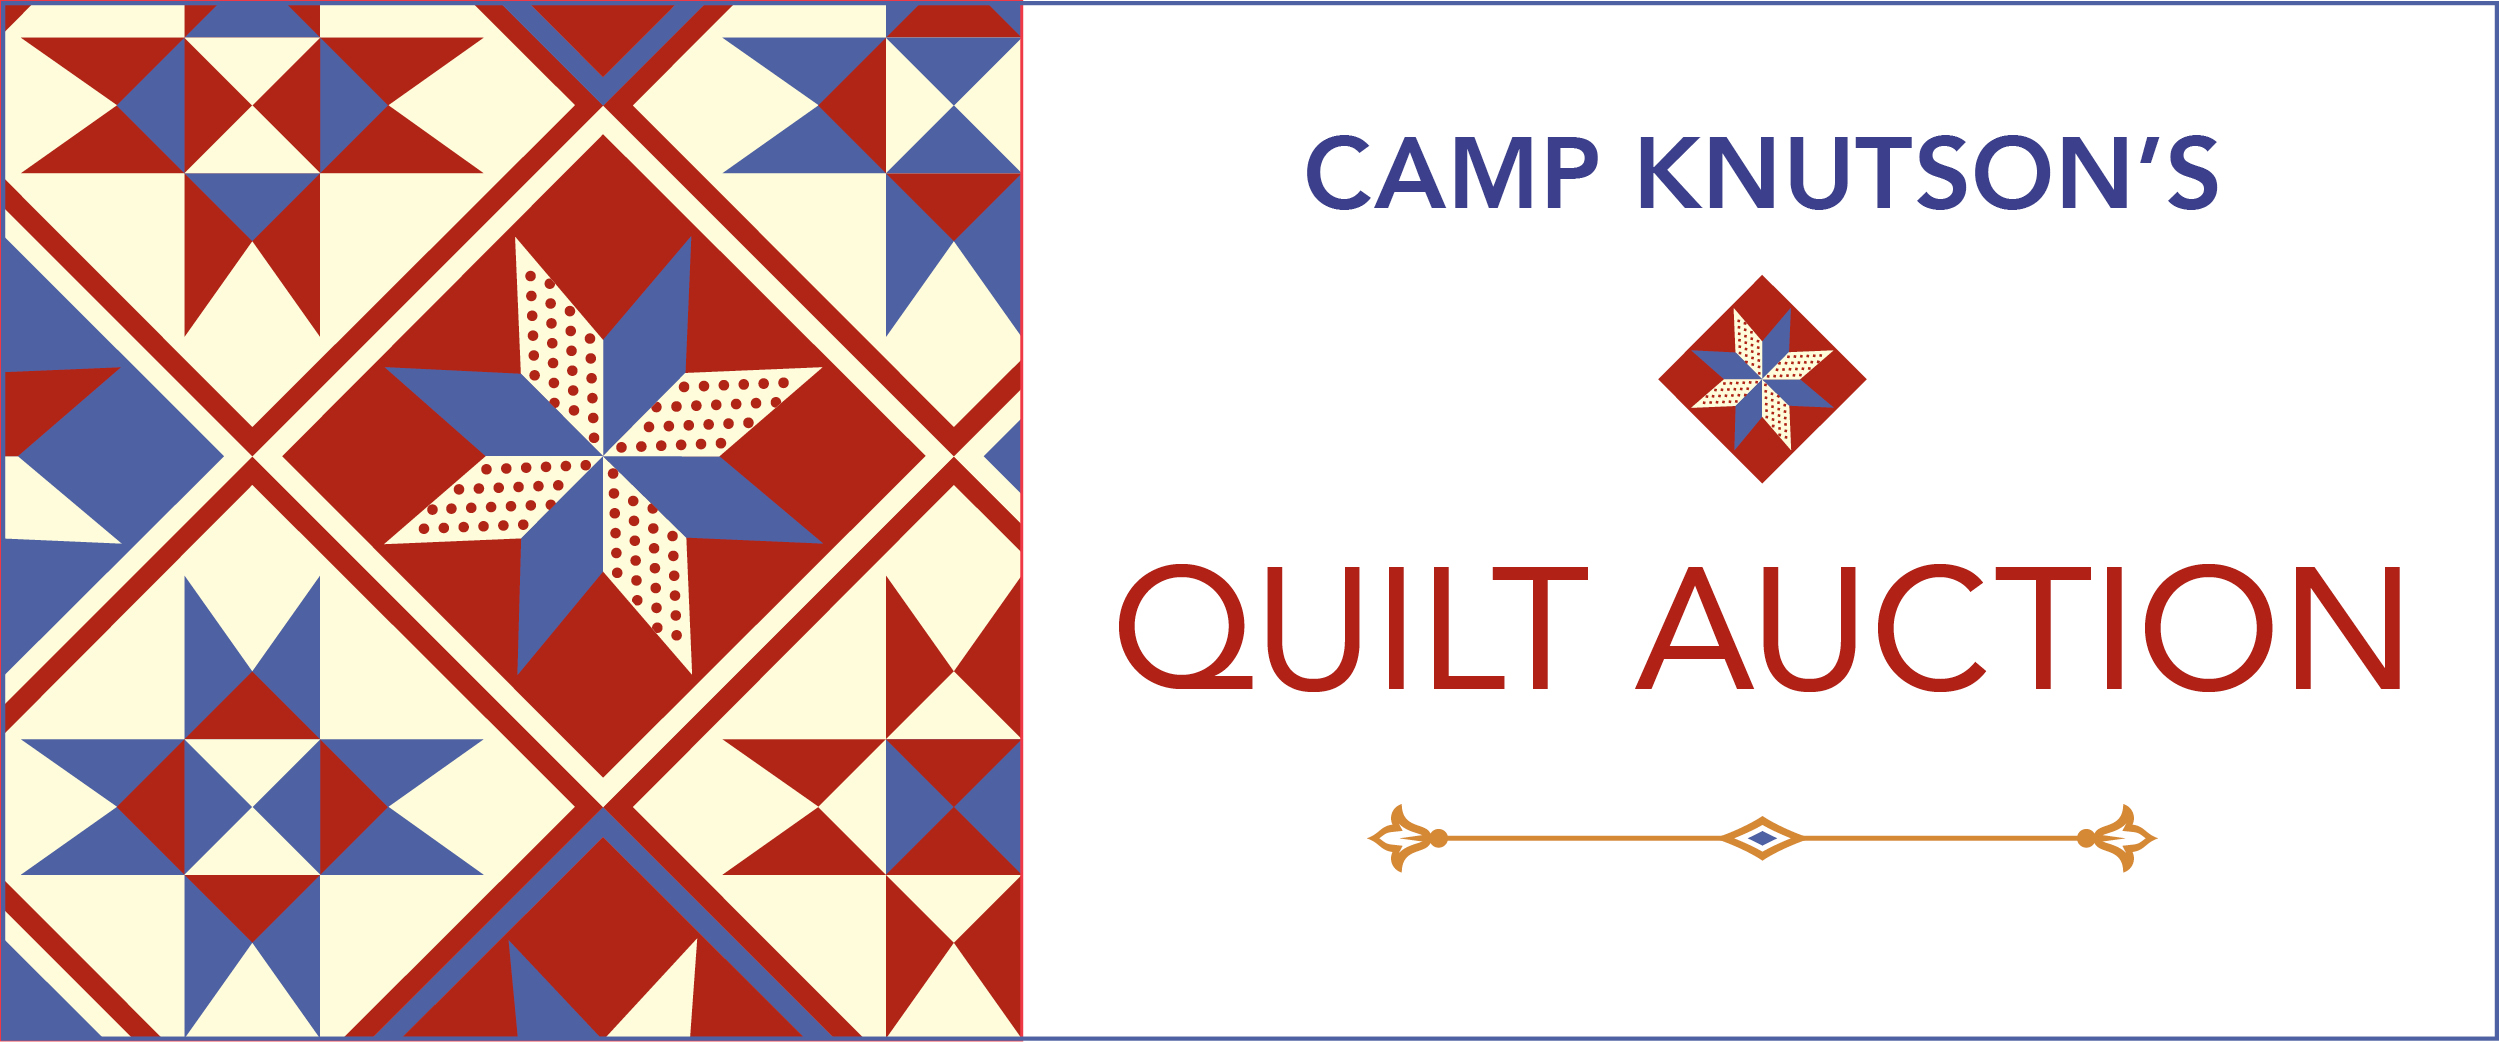 Graphic of blue and red quilt patterns with the text "Camp Knutson's Quilt Auction"